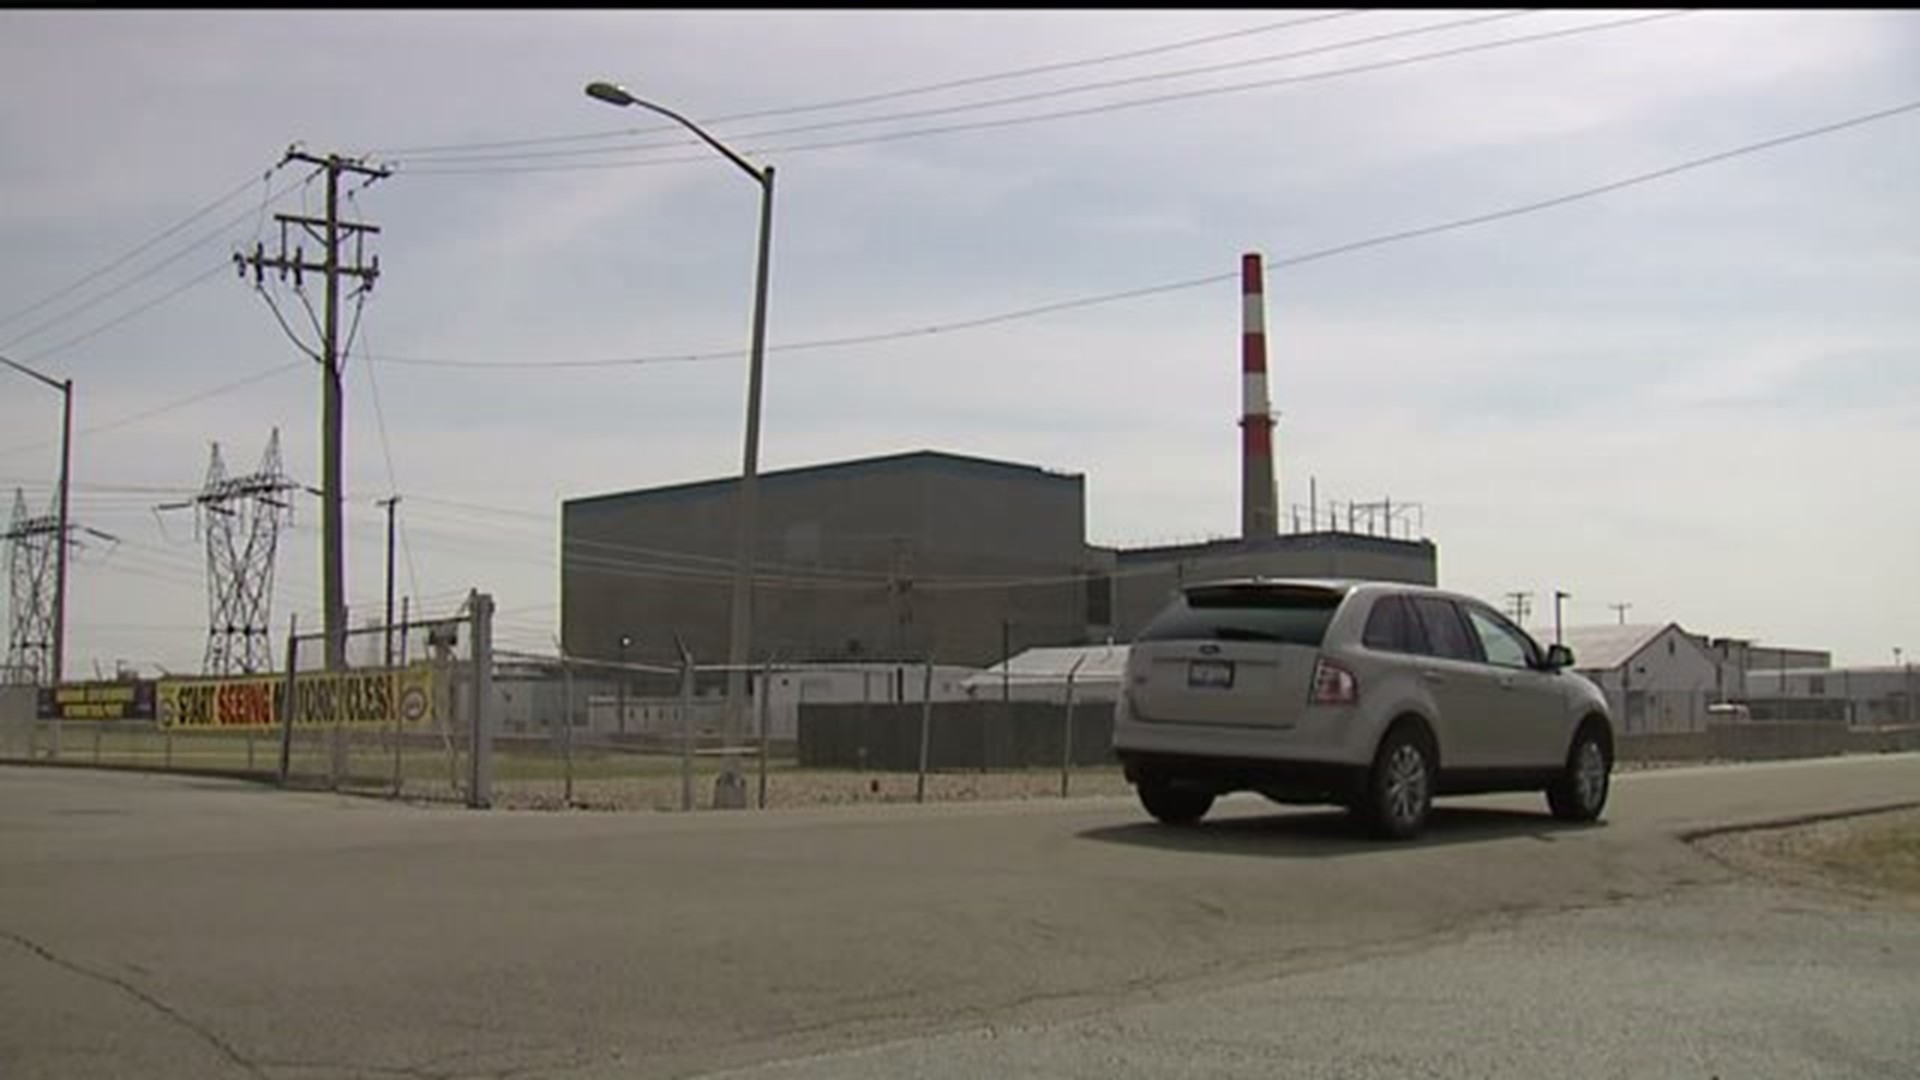 Future of Exelon unclear